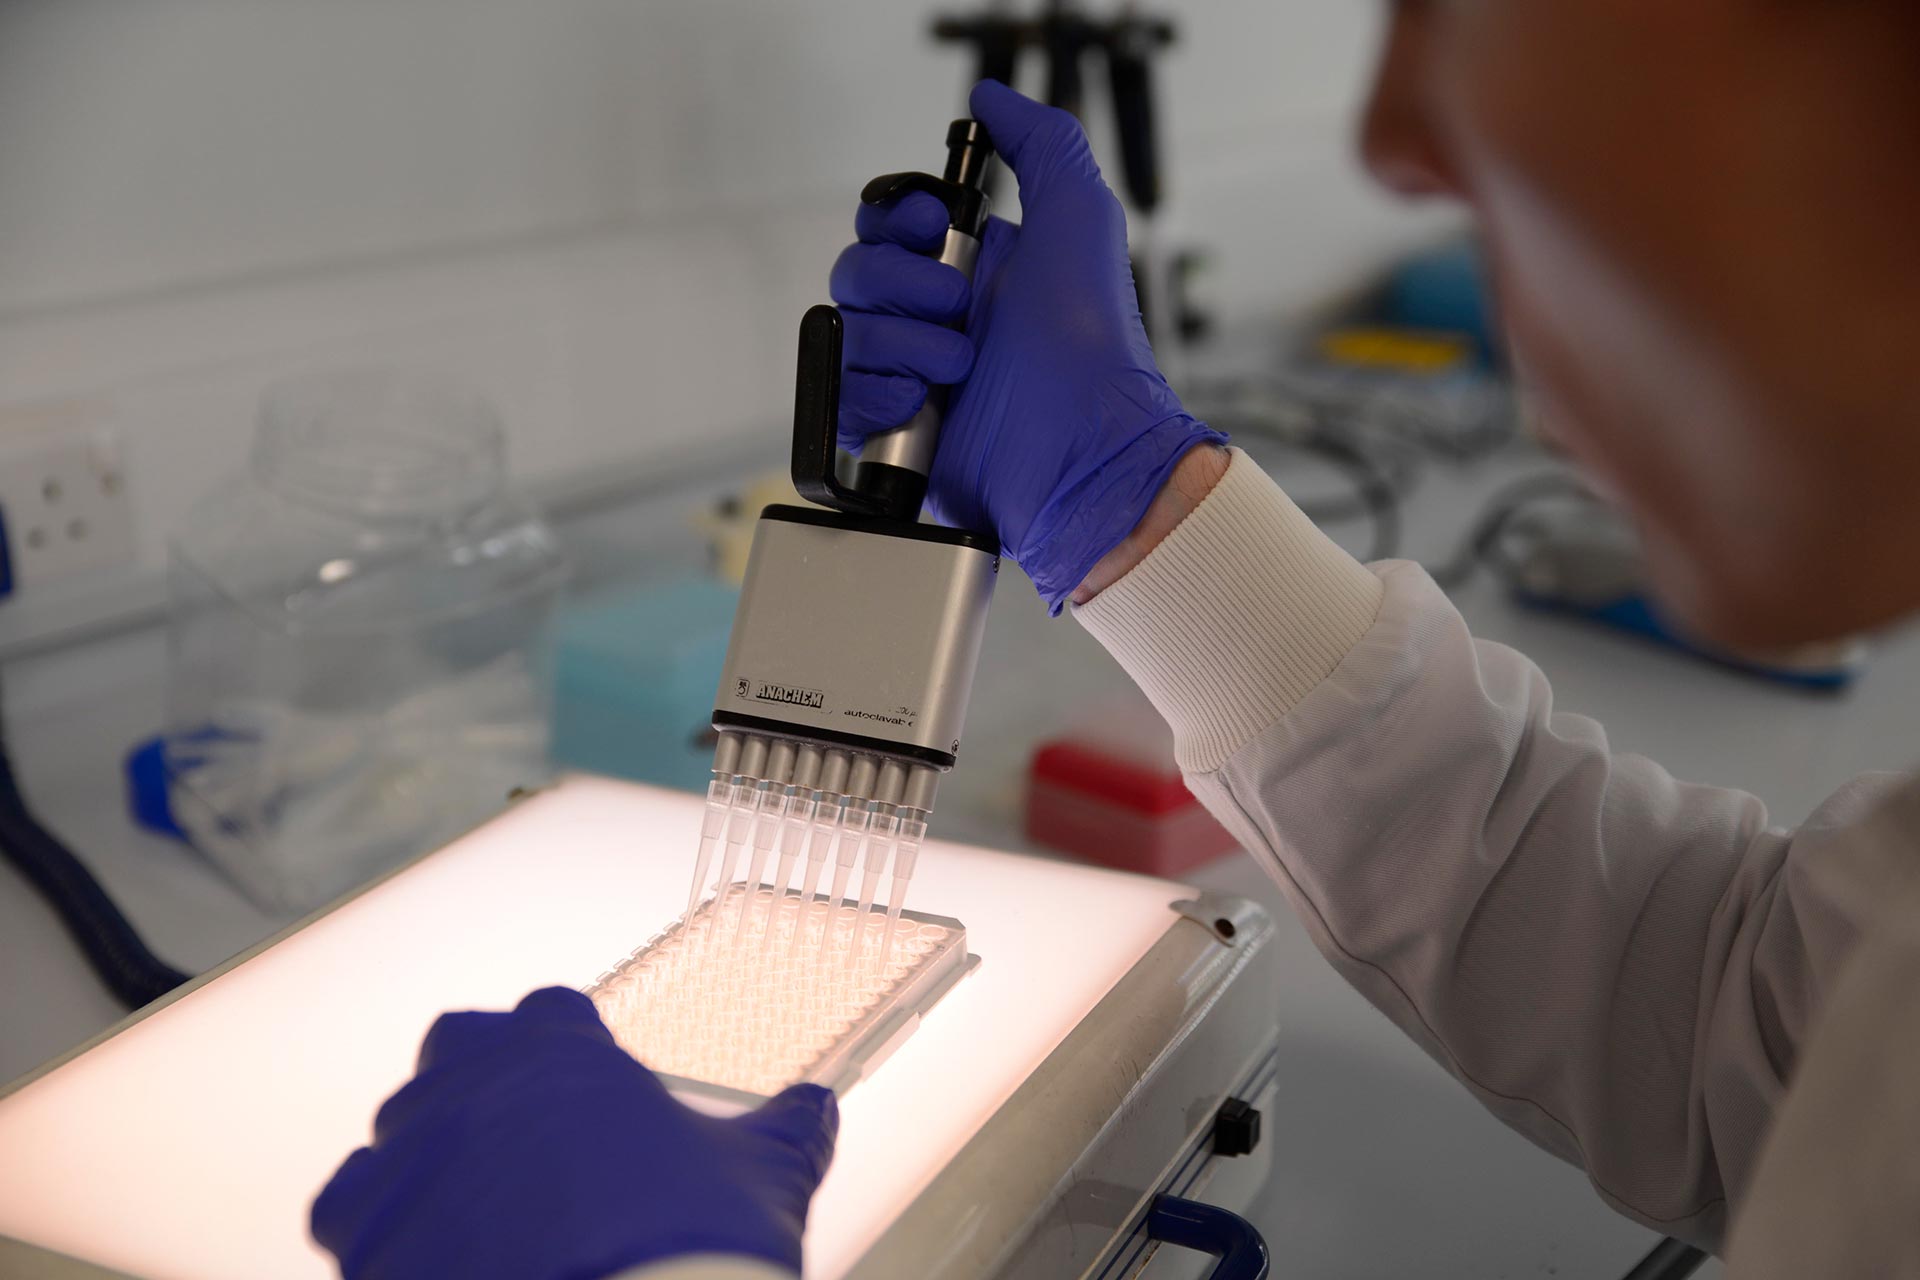 Technician working on the lab bench, using a multi-channel pipette with light-box illumination